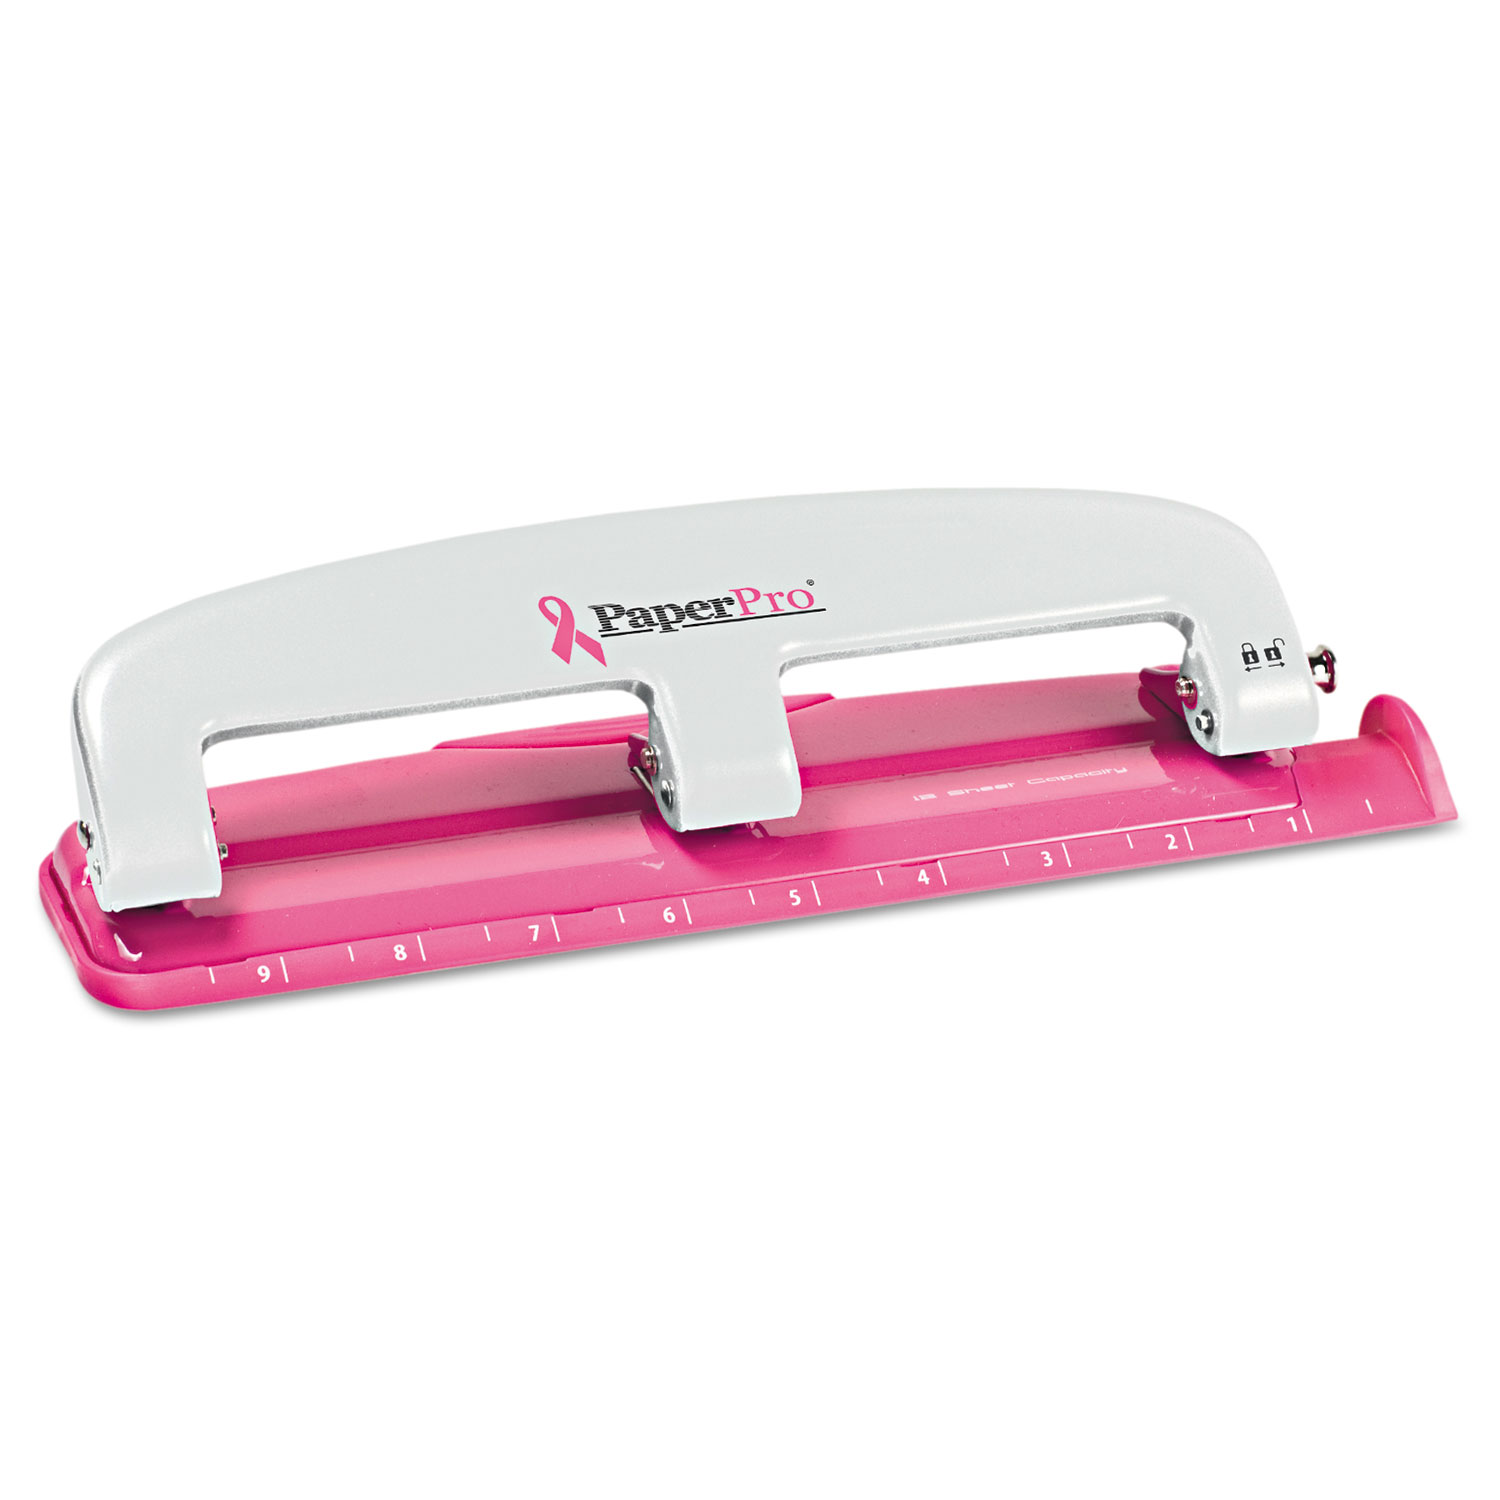  Bostitch 2188 EZ Squeeze InCourage Three-Hole Punch, 12-Sheet Capacity, Pink (ACI2188) 